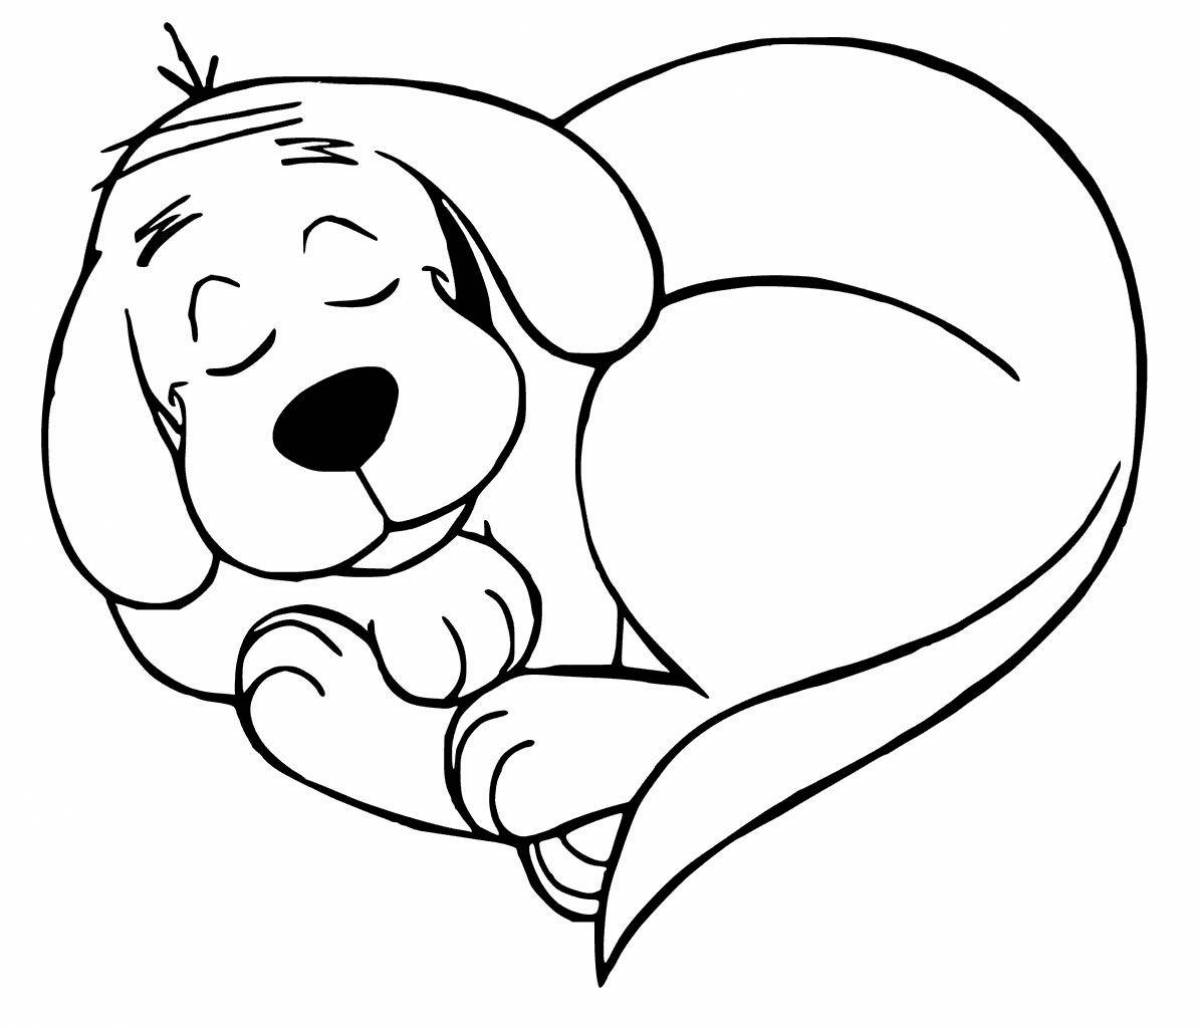 Fun dog coloring book for kids